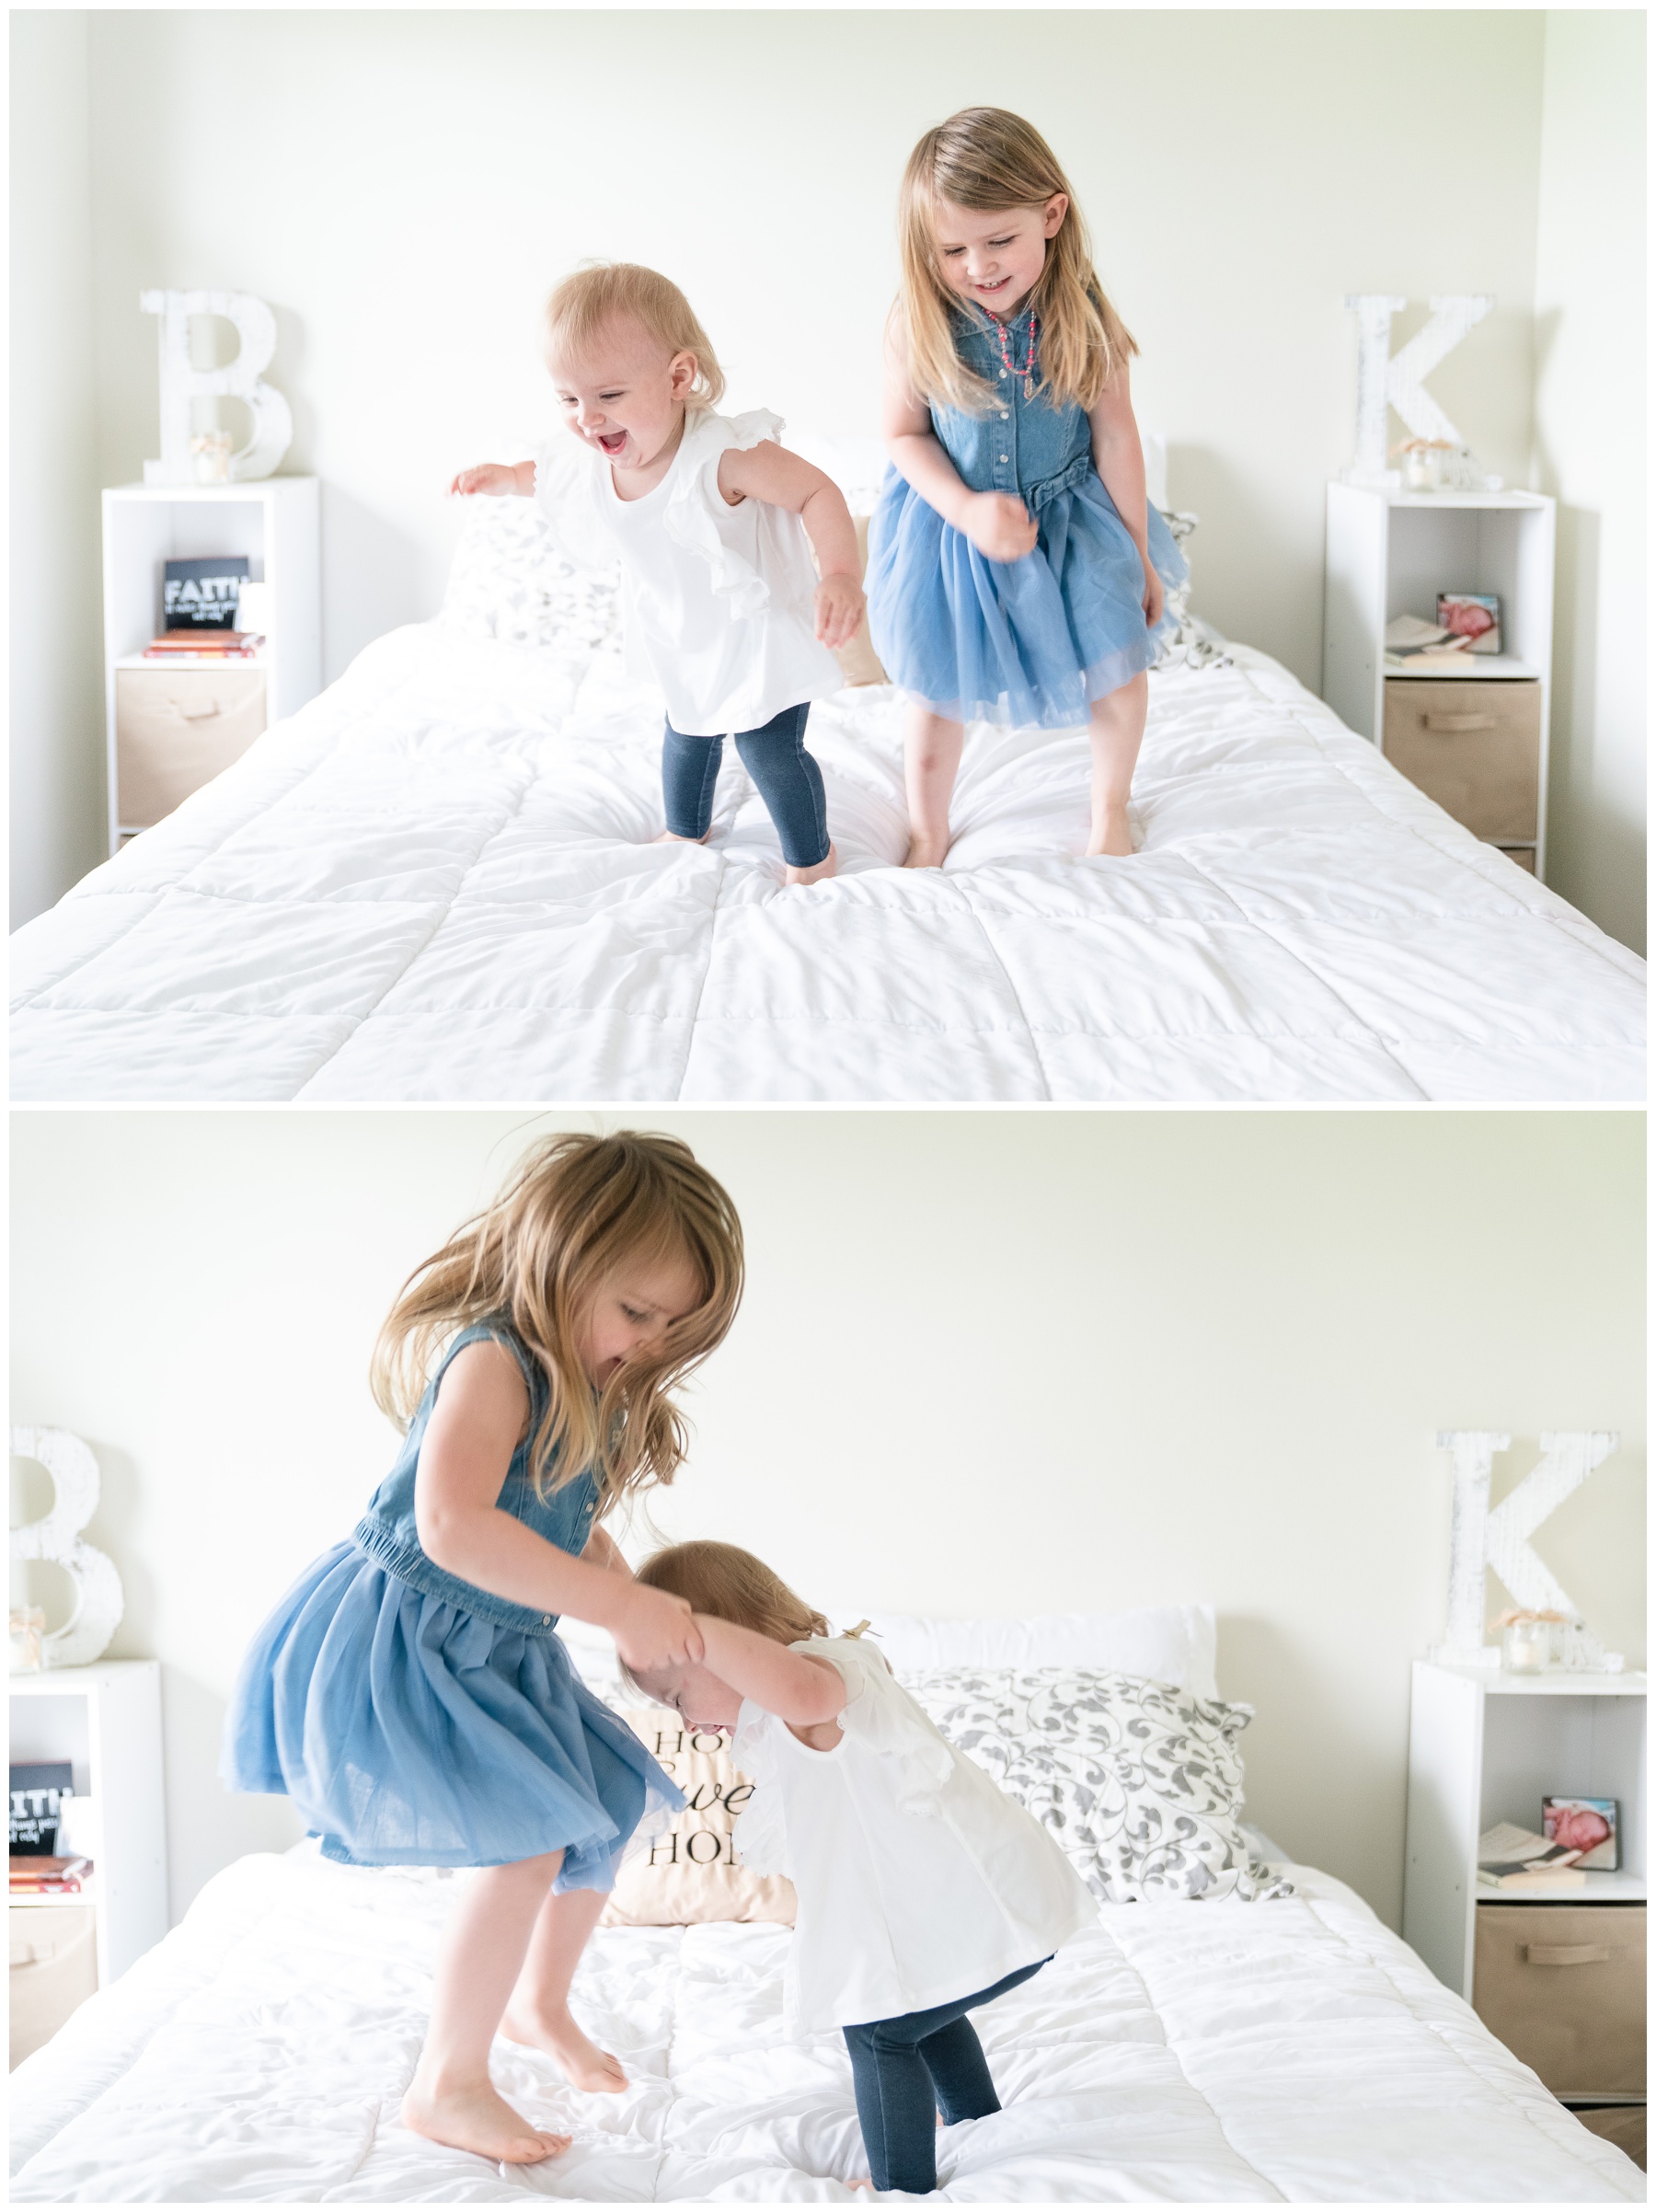 Lifestyle Family Session - Girls jumping on the bed